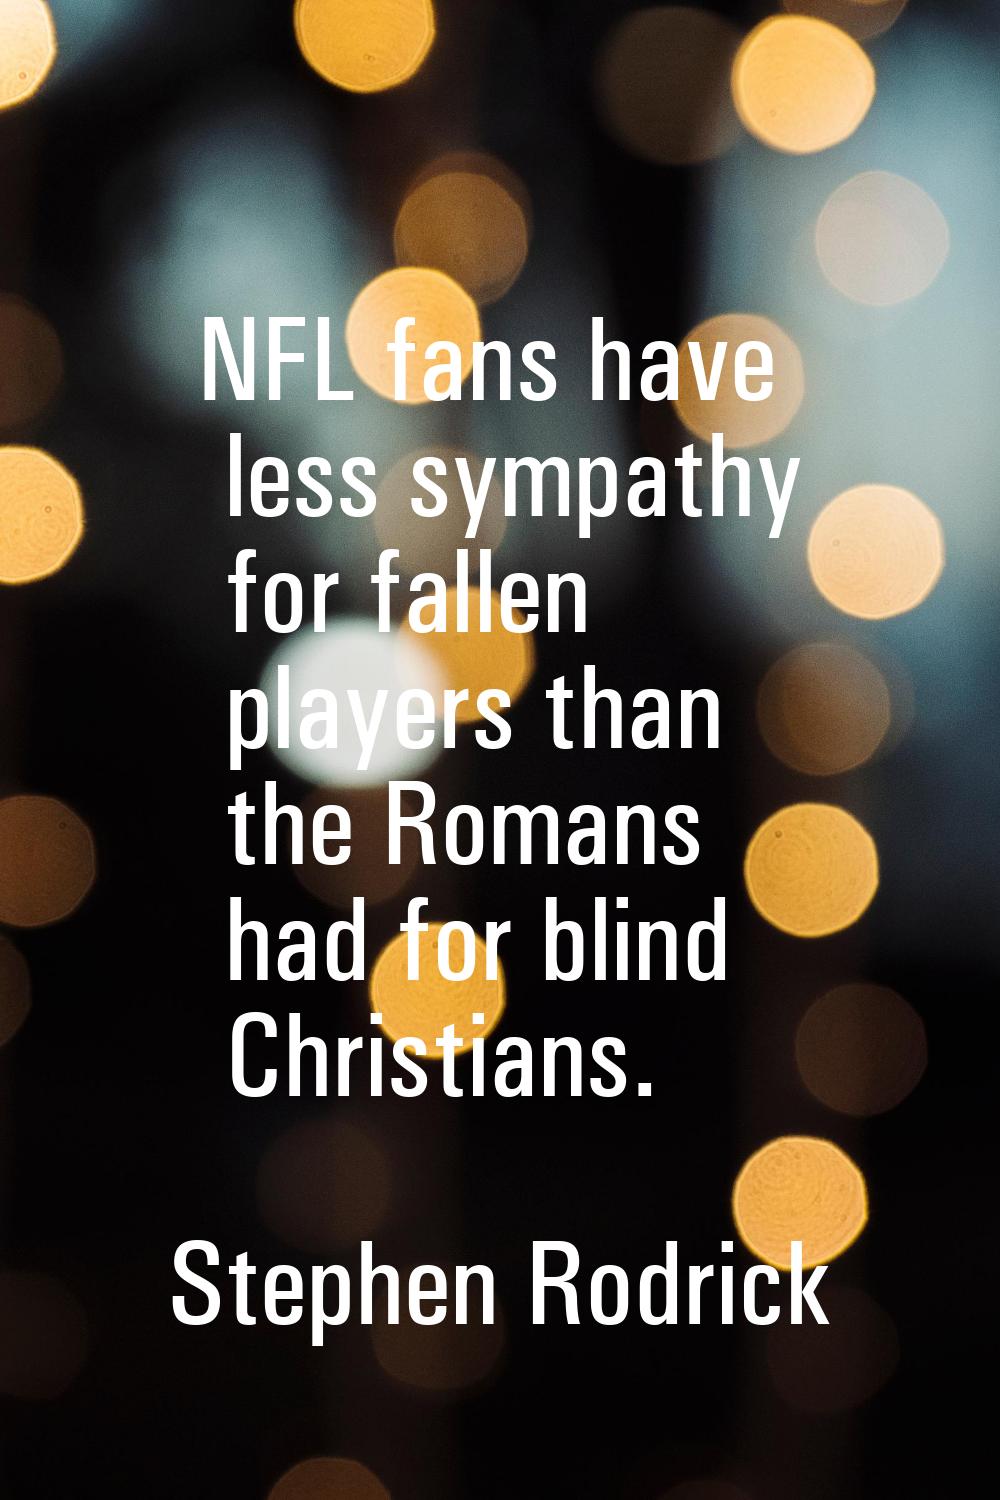 NFL fans have less sympathy for fallen players than the Romans had for blind Christians.